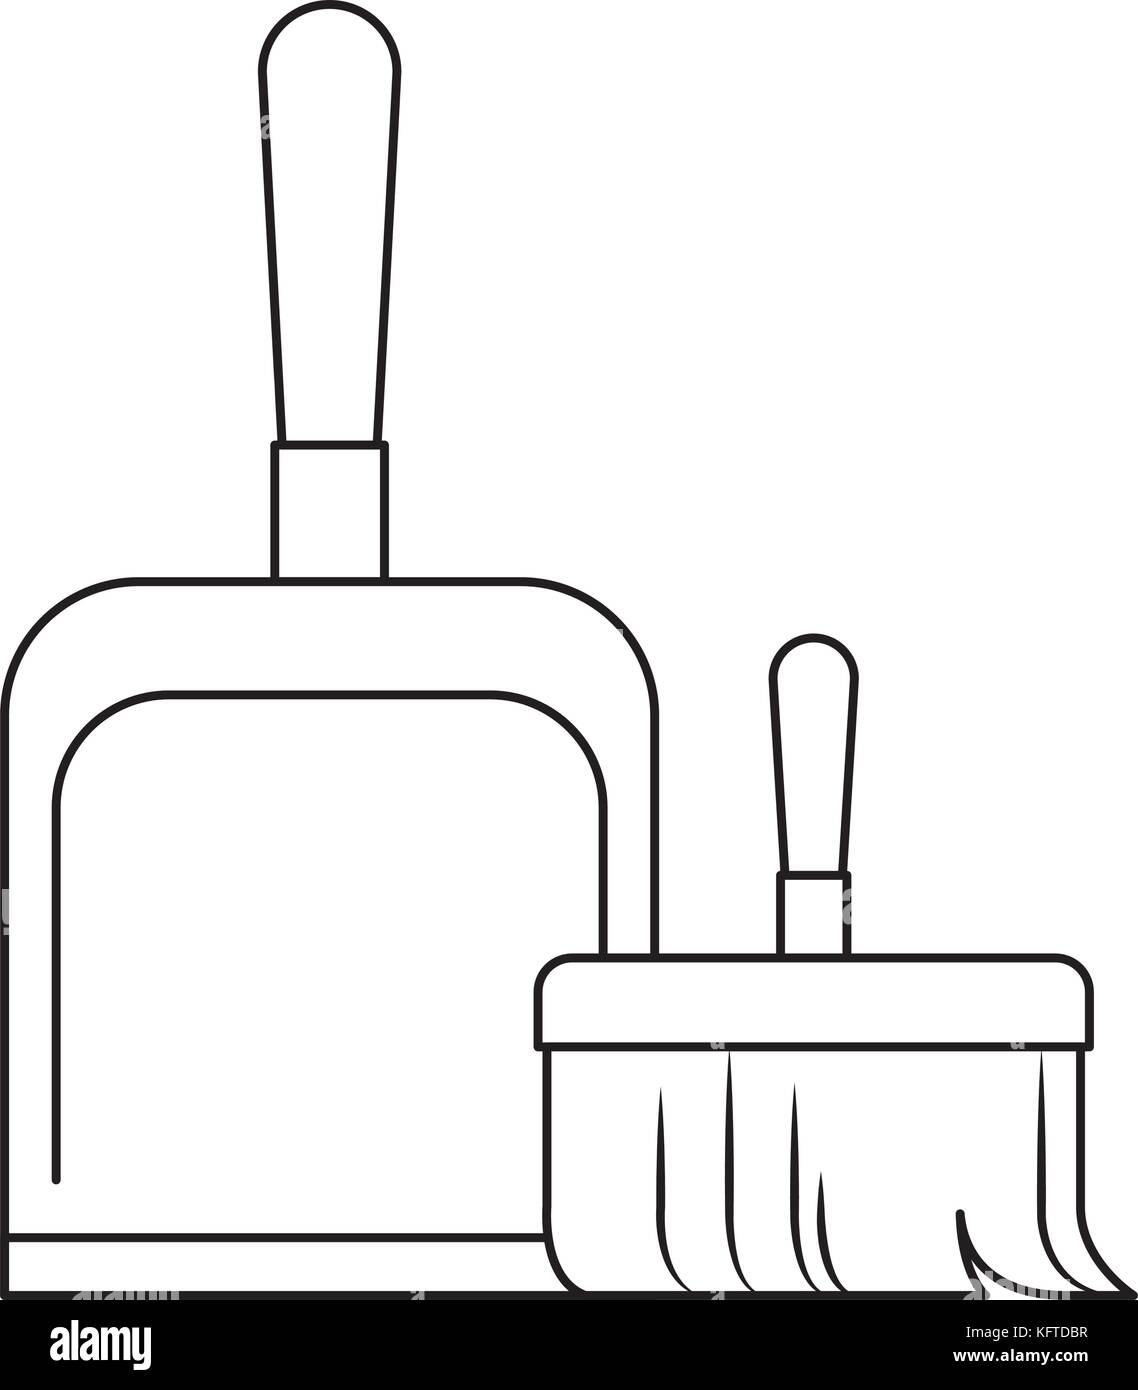 dustpan and hand broom in monochrome silhouette Stock Vector